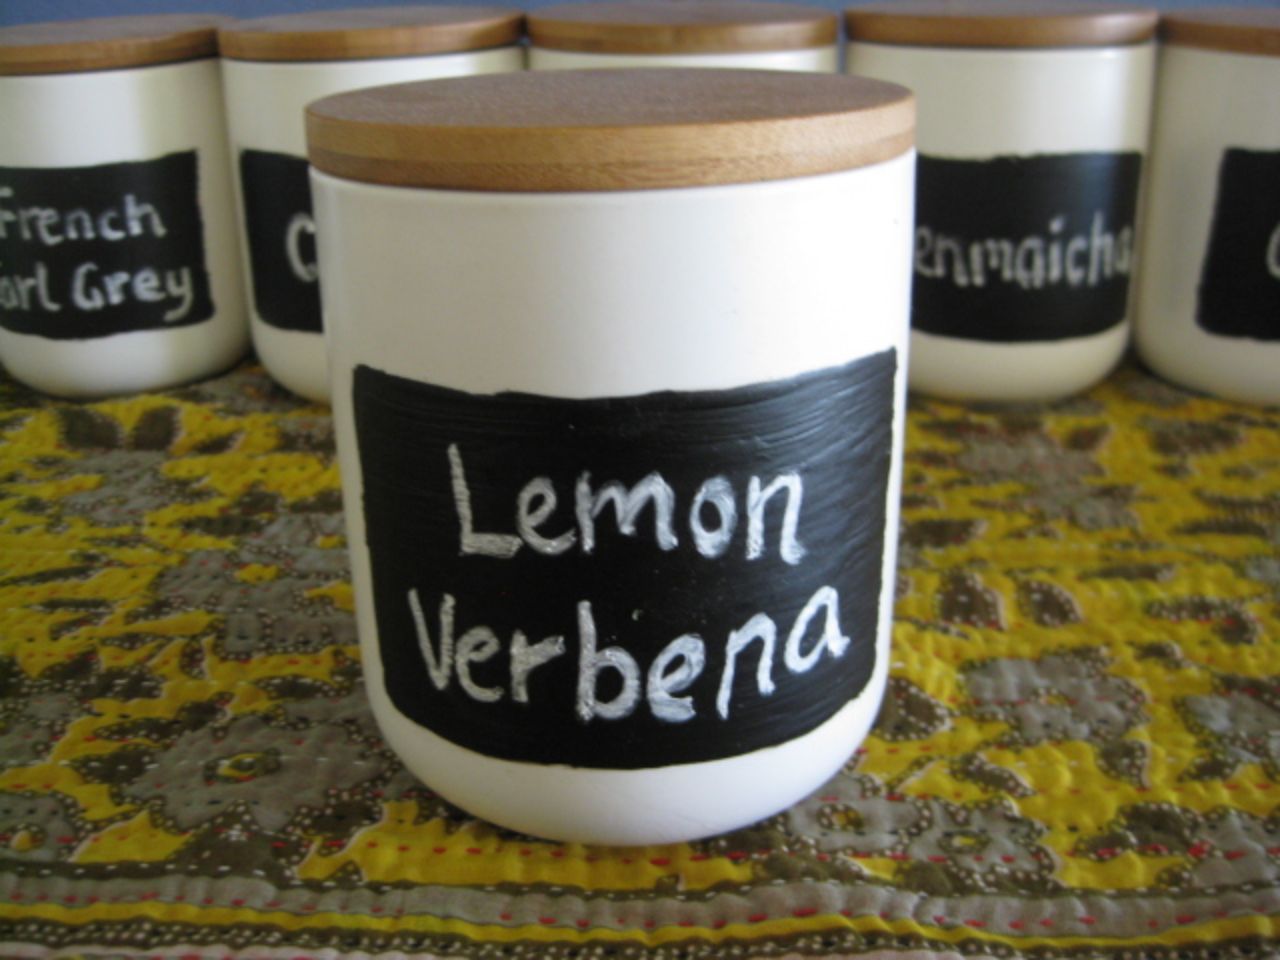 candle canisters repurposed for tea storage, painted with blackboard paint for tea labels